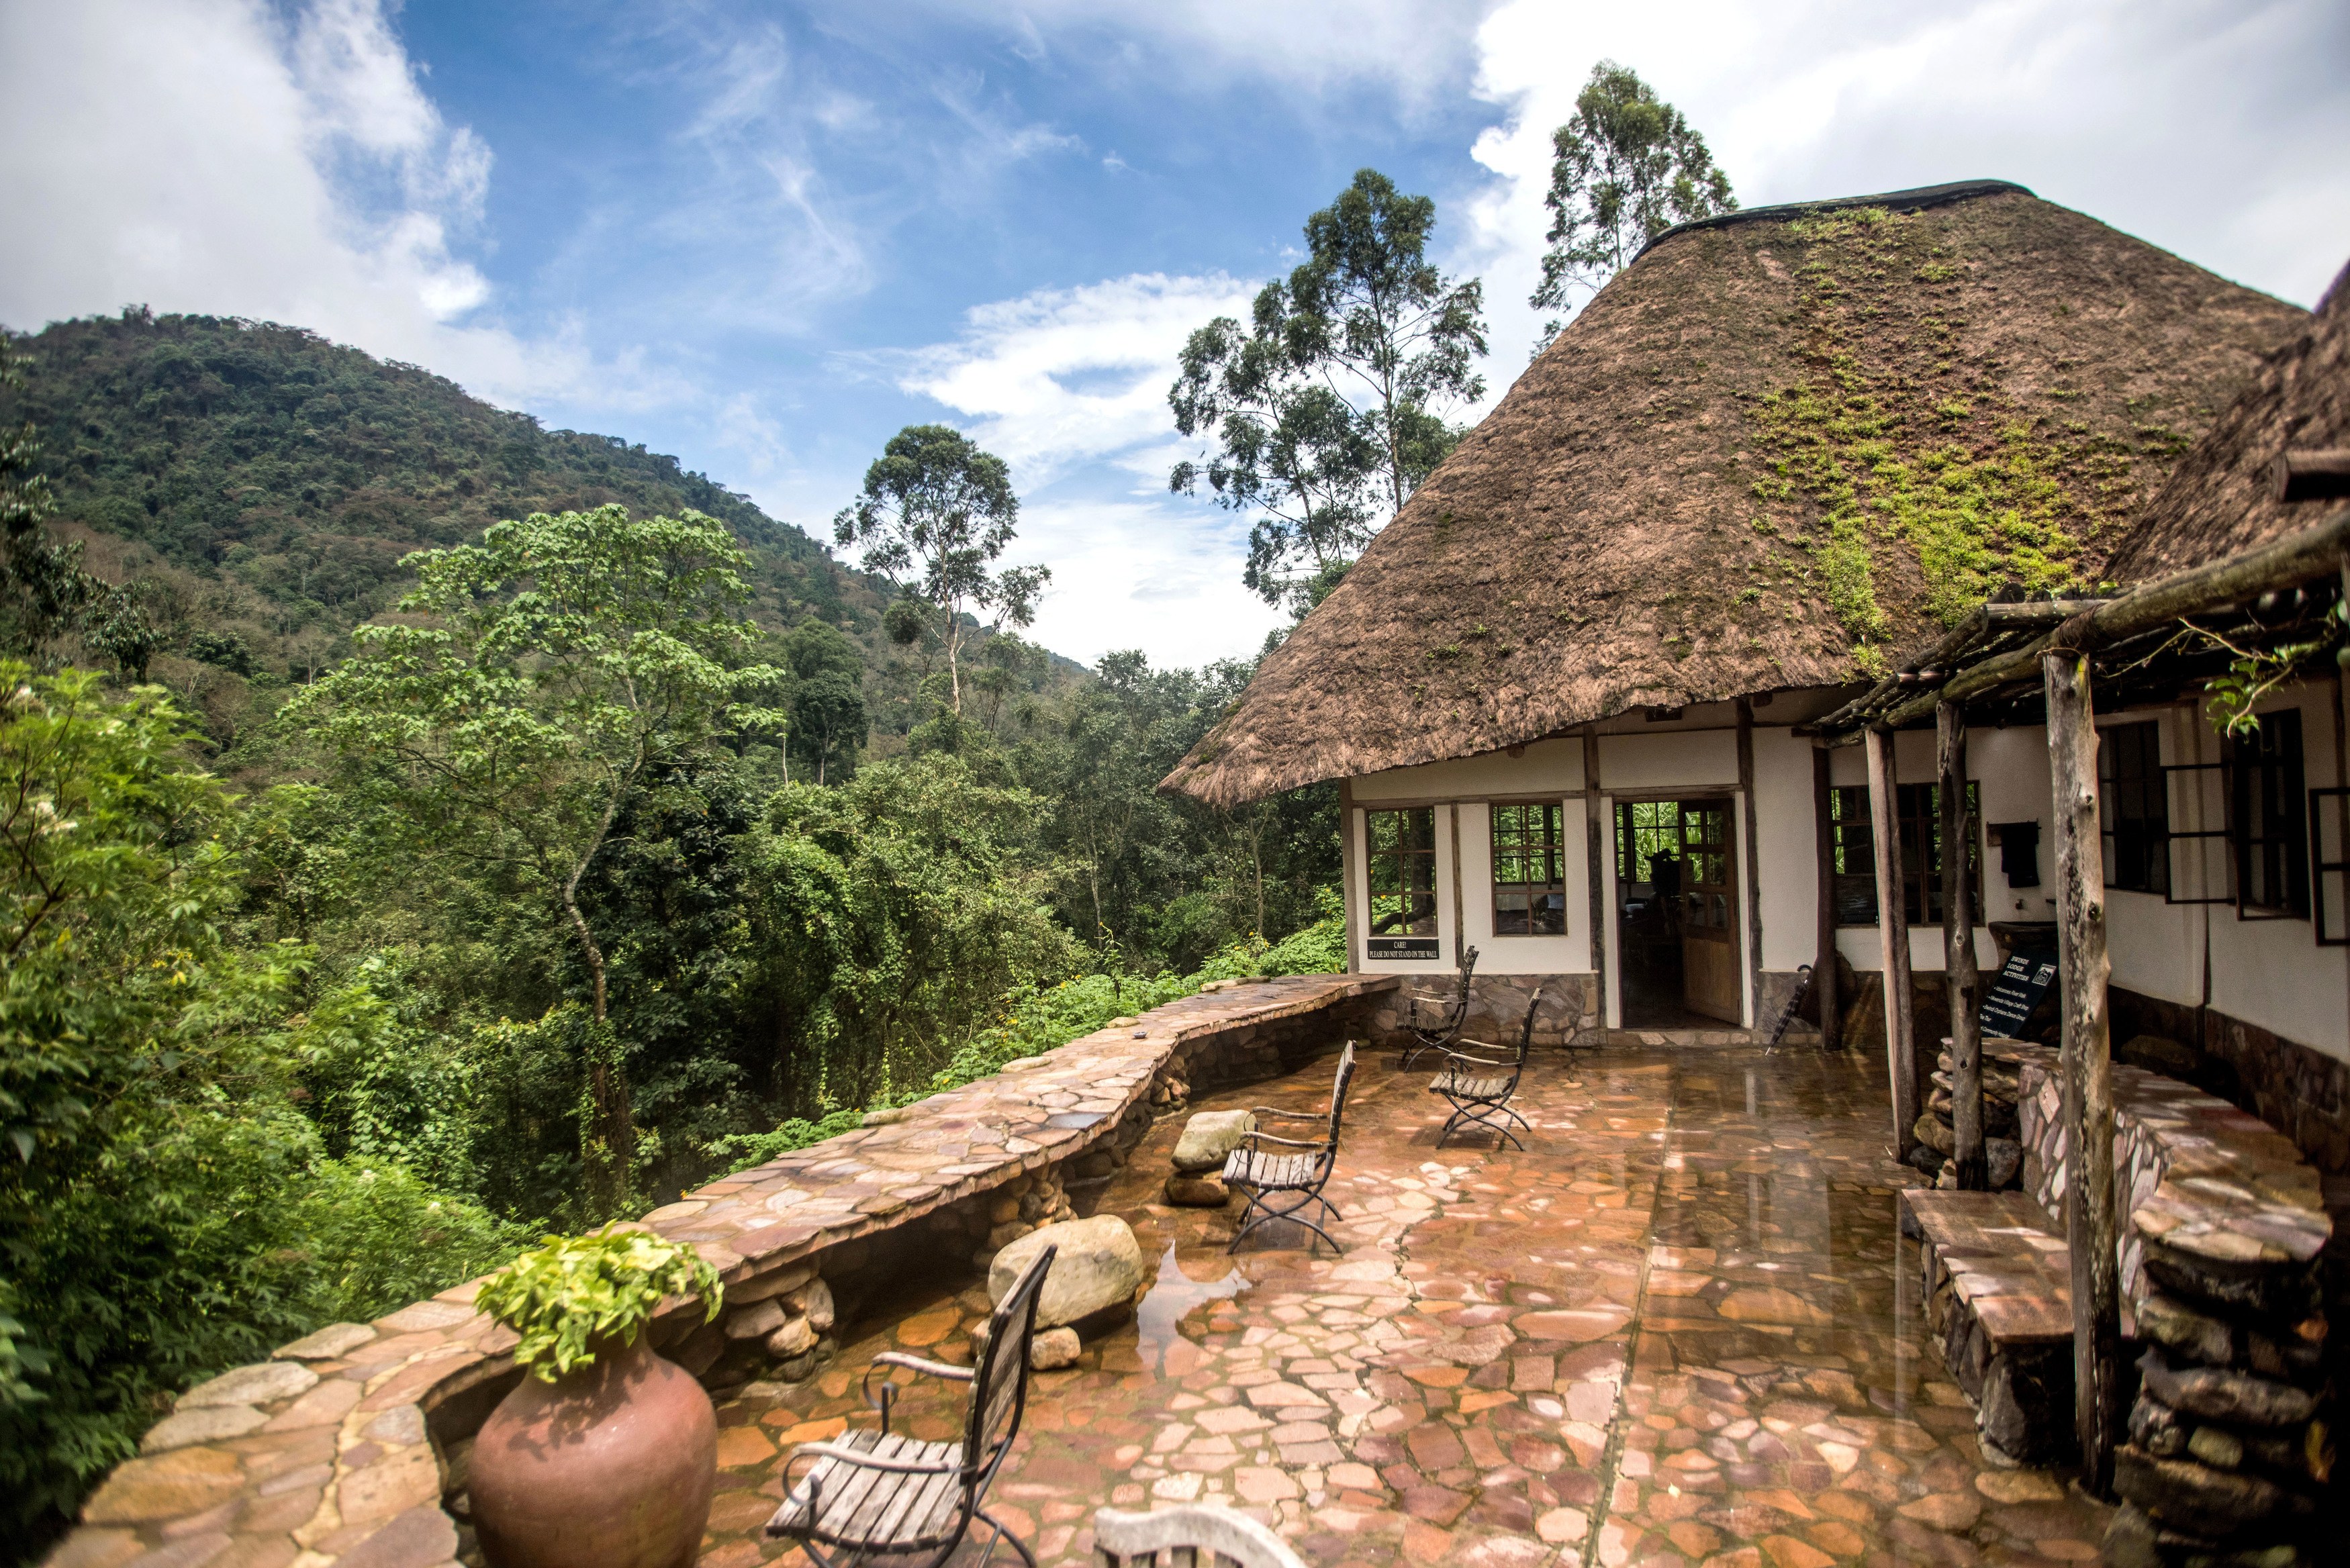 Best Places to stay in Bwindi - Bwindi Lodge is a luxury safari lodge situated in the Buhoma sector hardly a 5 minutes walk to the Uganda Wildlife Authority - UWA Gorilla trekking briefing point.